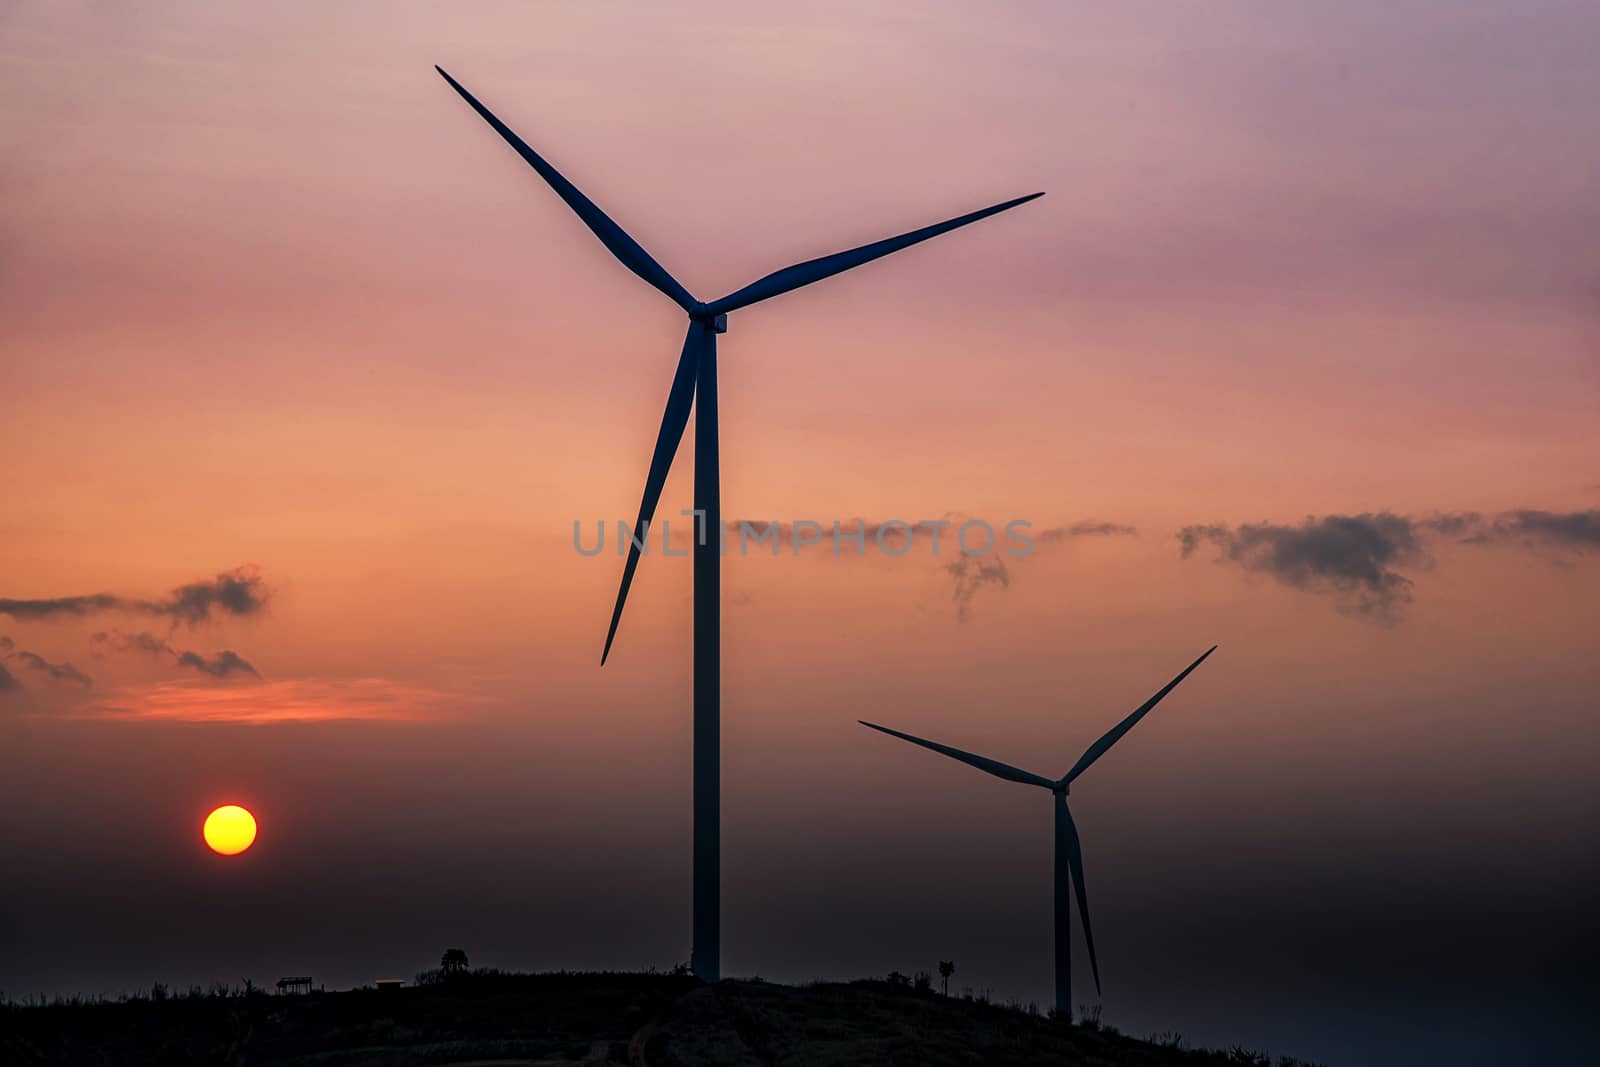 Wind Turbines over a sunset background. by NuwatPhoto